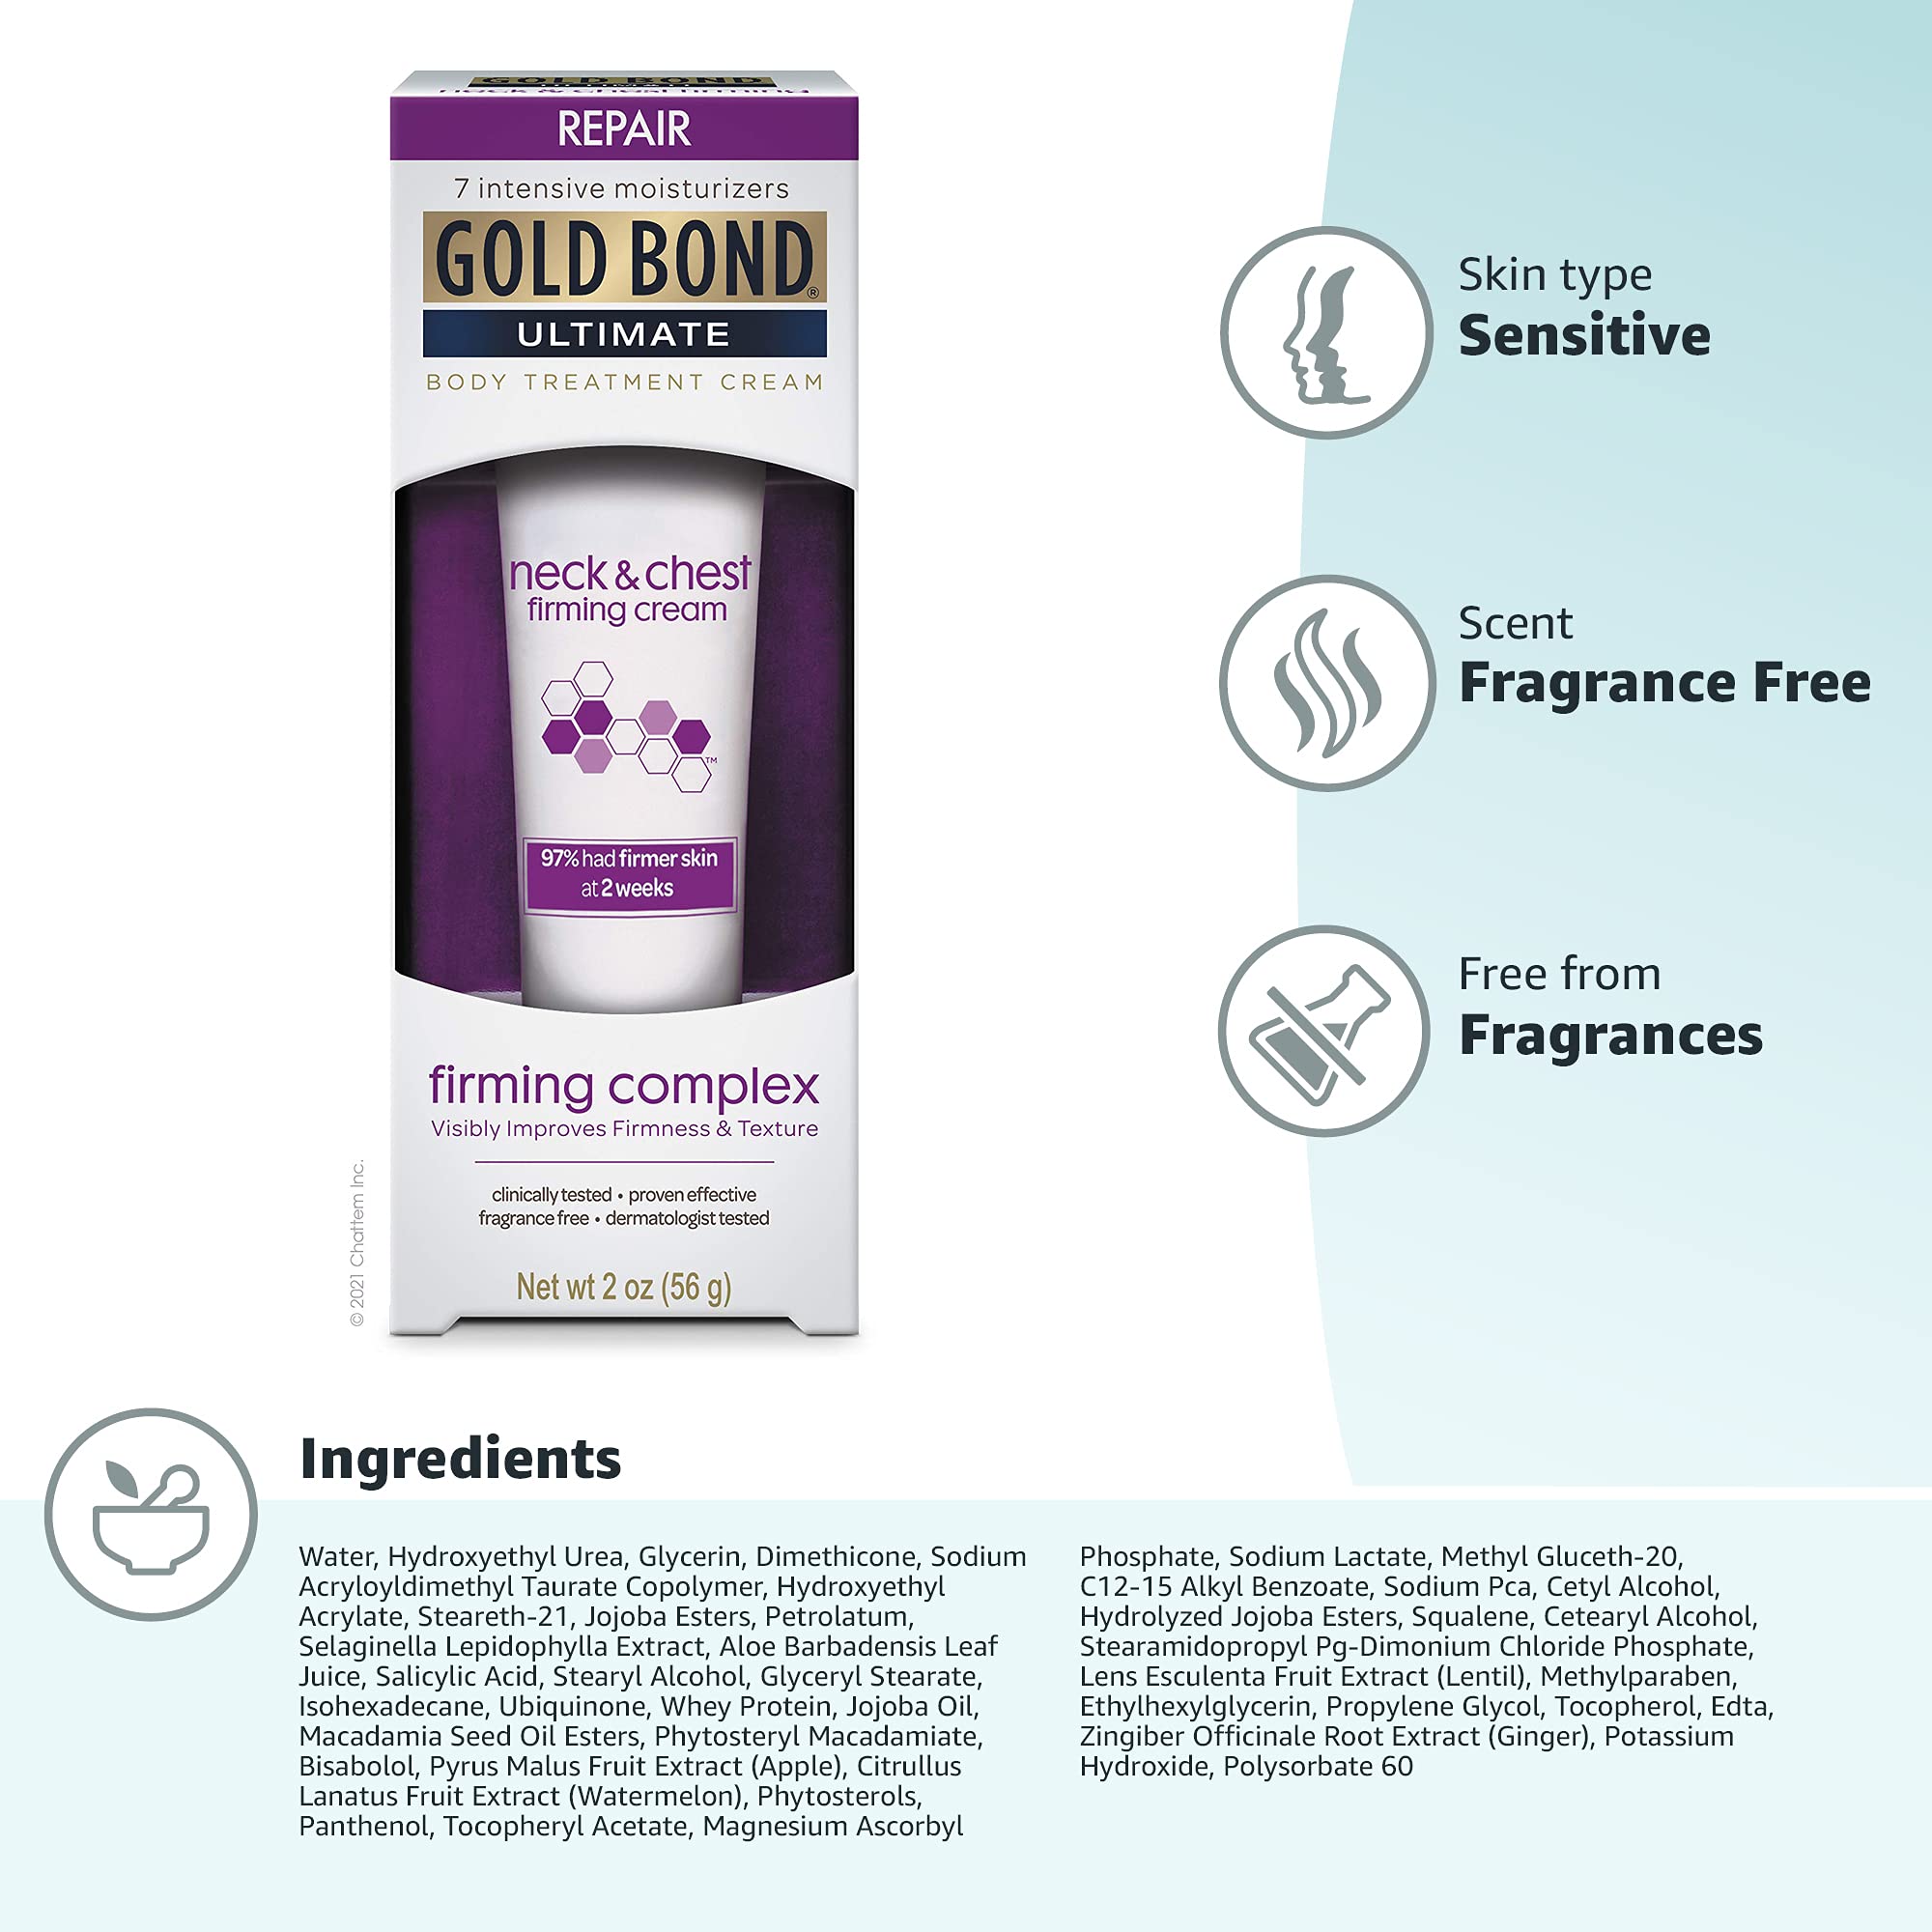 Gold Bond Age Renew Neck & Chest Firming Age Renew Cream, 2 oz., Clinically Tested Skin Firming Cream